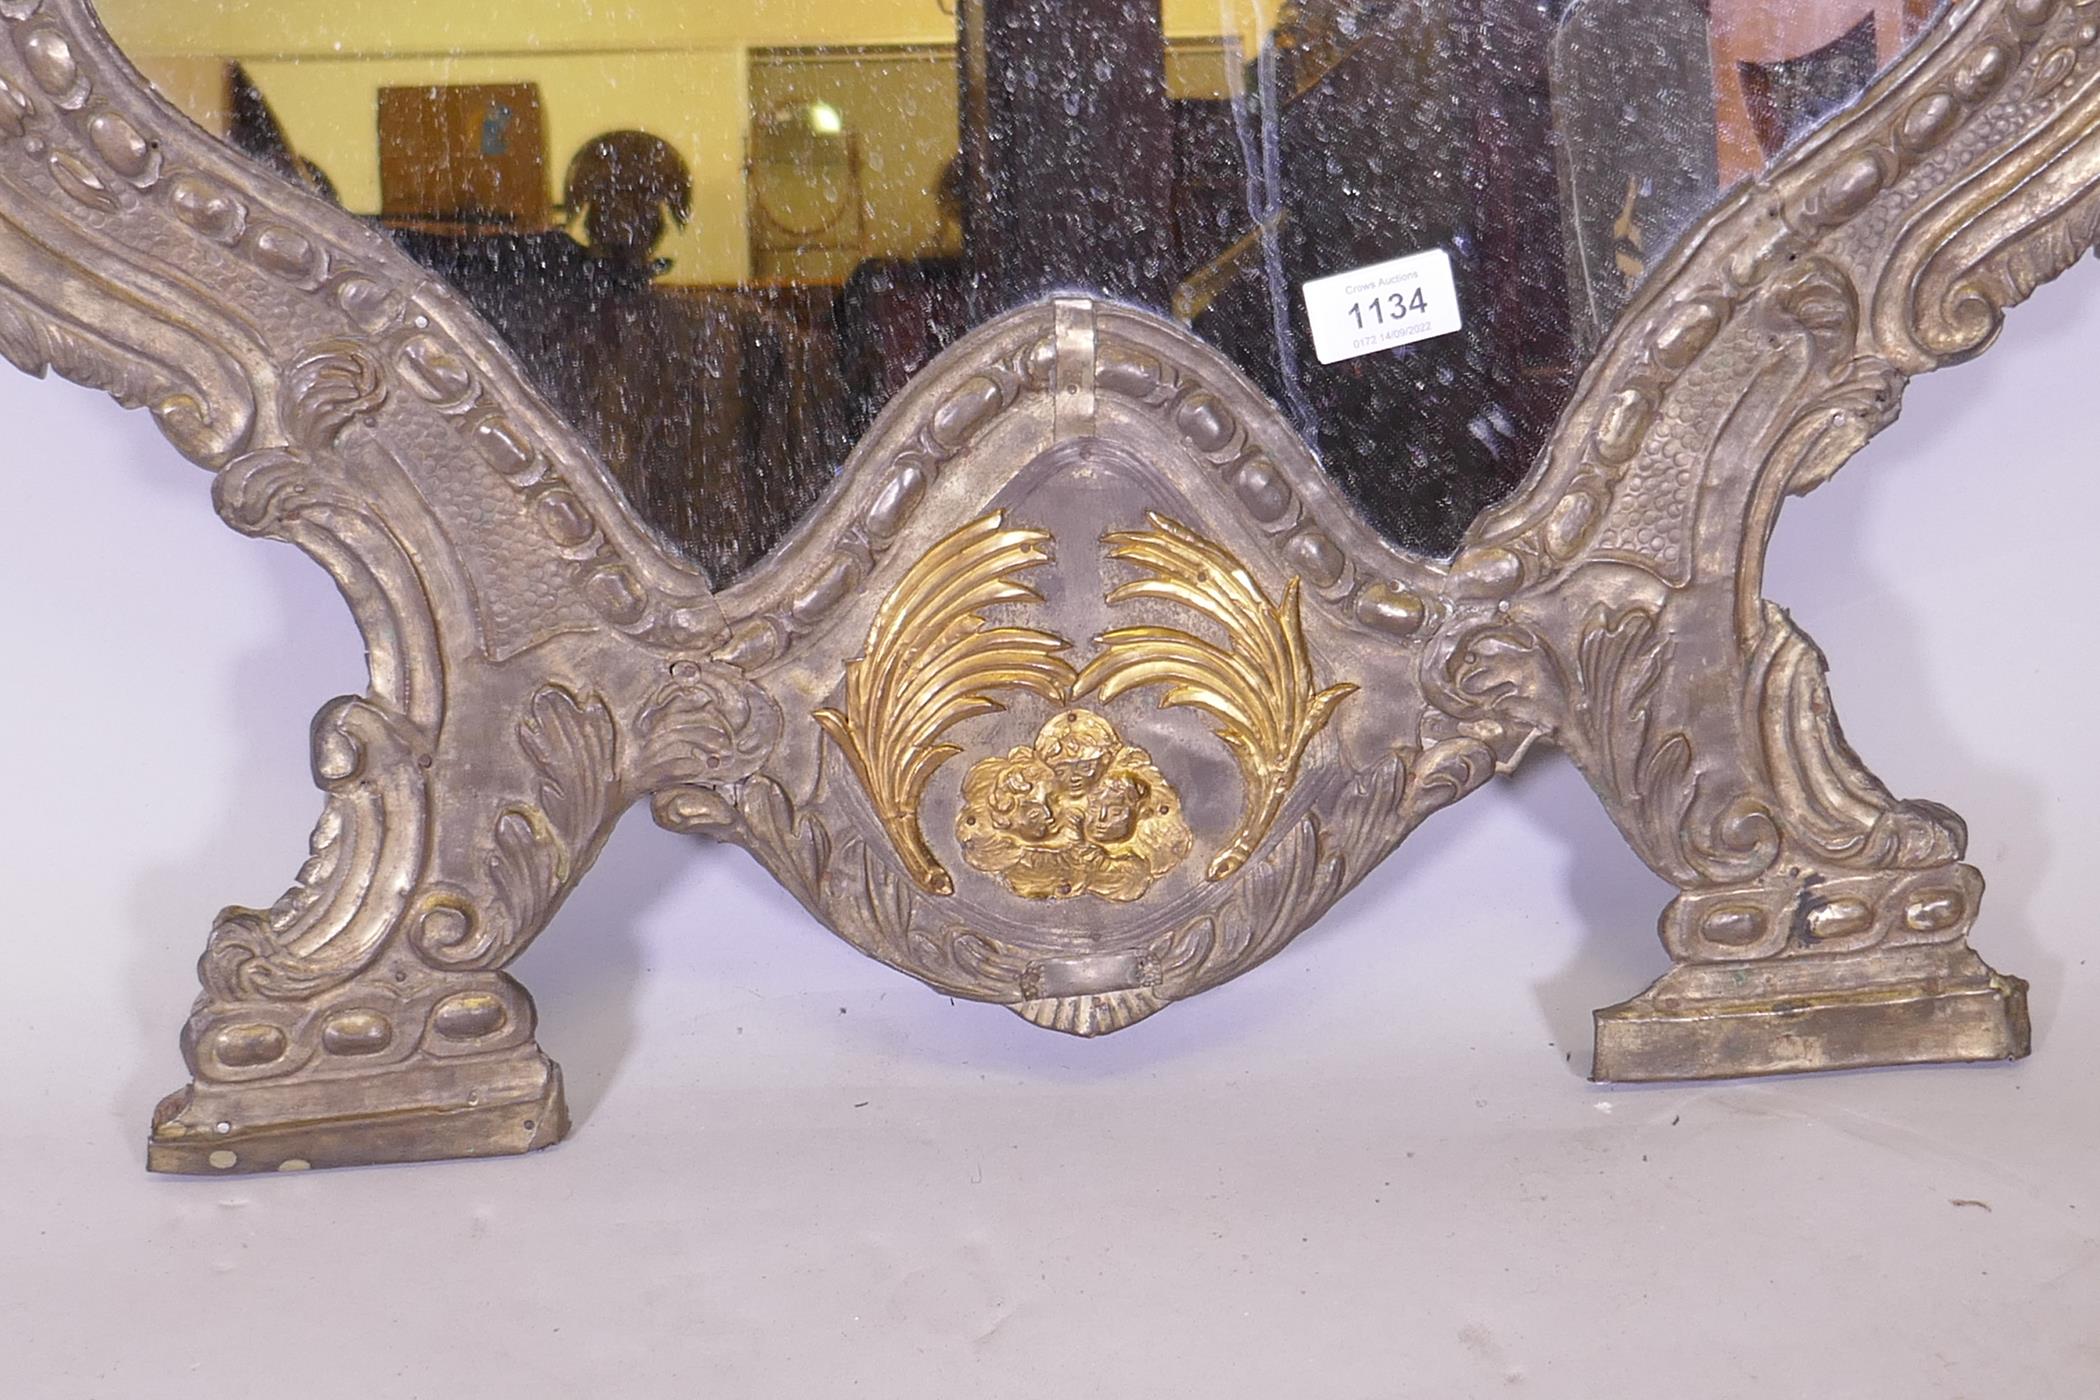 A C19th continental wall mirror, the repousse white metal covers with decorative ormolu mounts, 75 x - Image 3 of 3